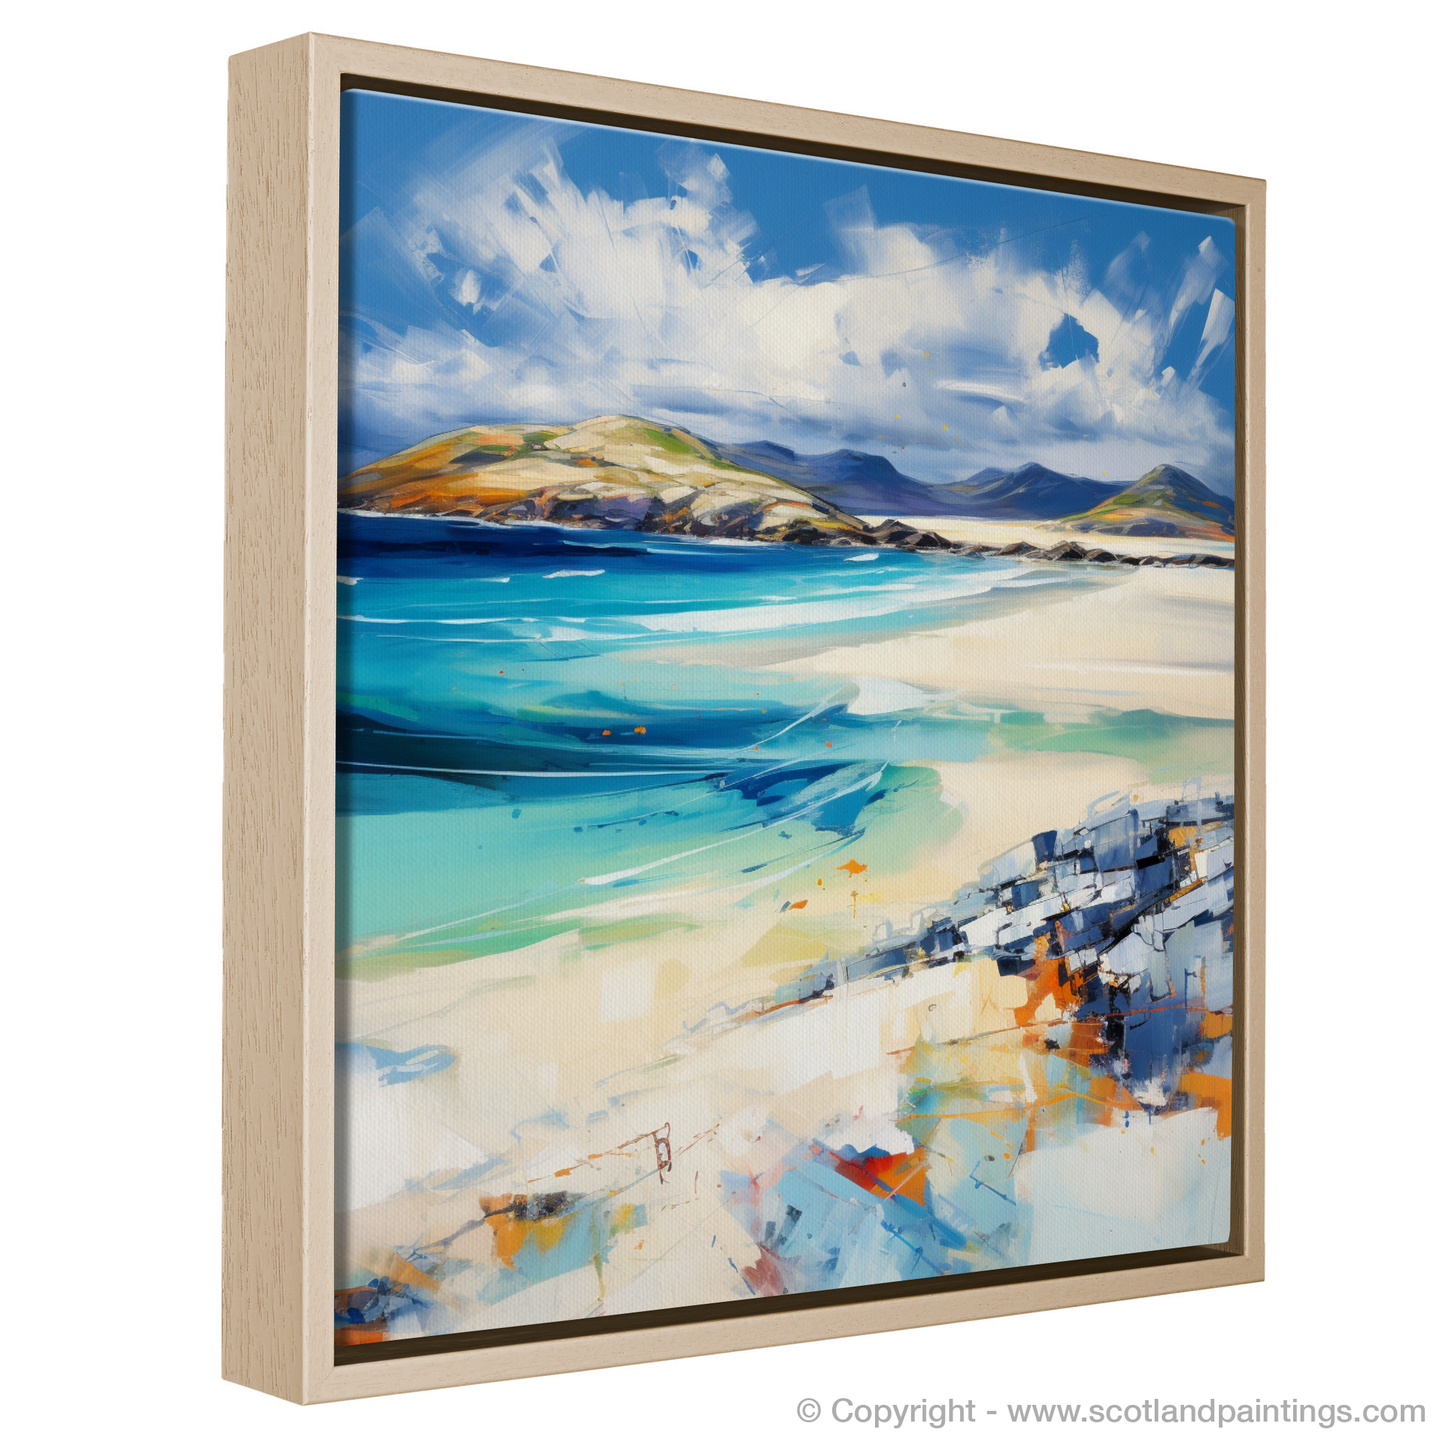 Painting and Art Print of Luskentyre Beach, Isle of Harris entitled "Luskentyre Beach Unleashed: An Expressionist Ode to Hebridean Splendour".